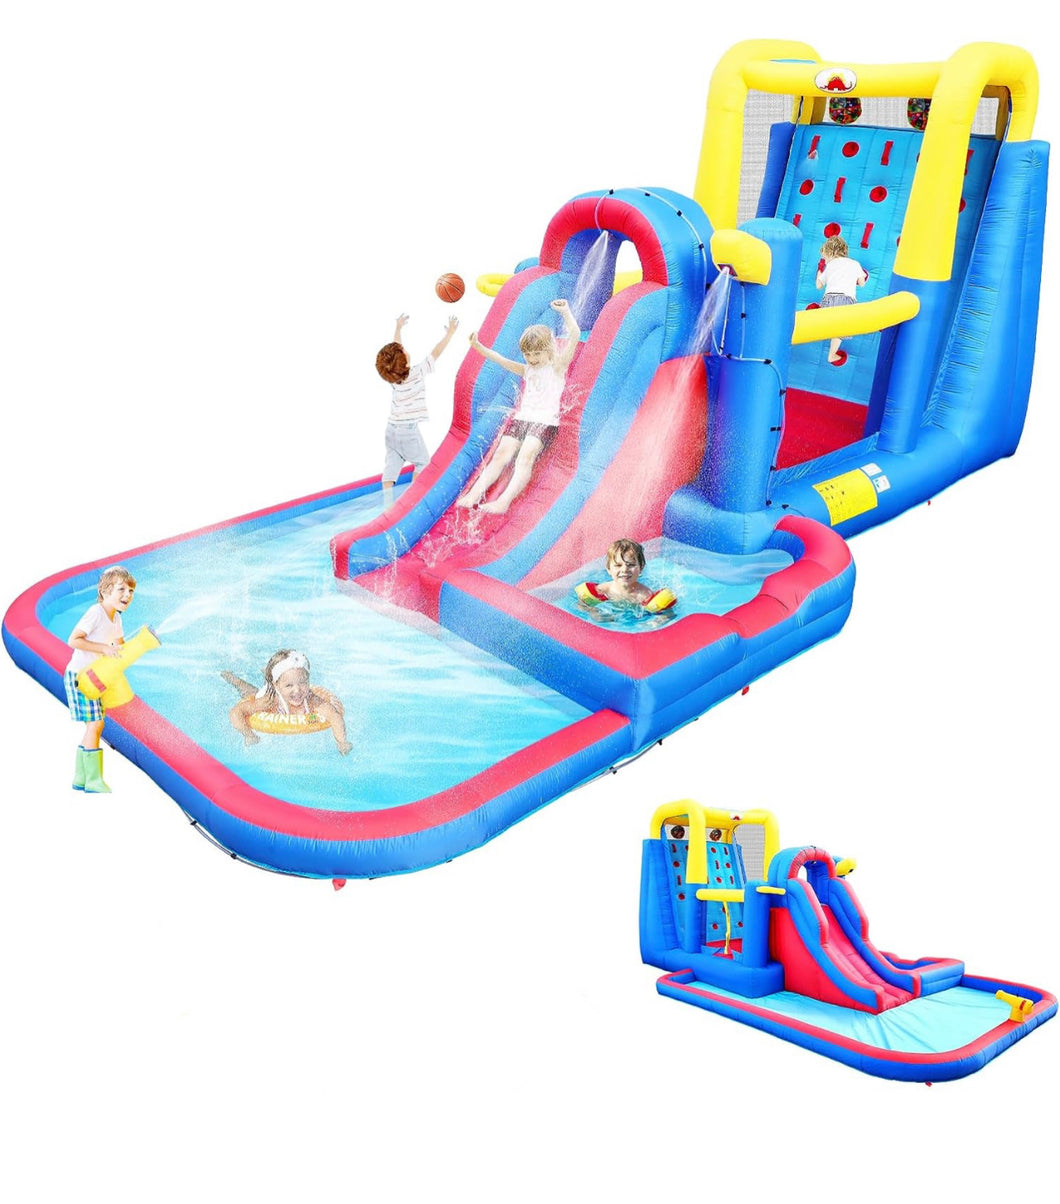 Kids Water Slide Park, 50% deposit required within 3 days after order is made